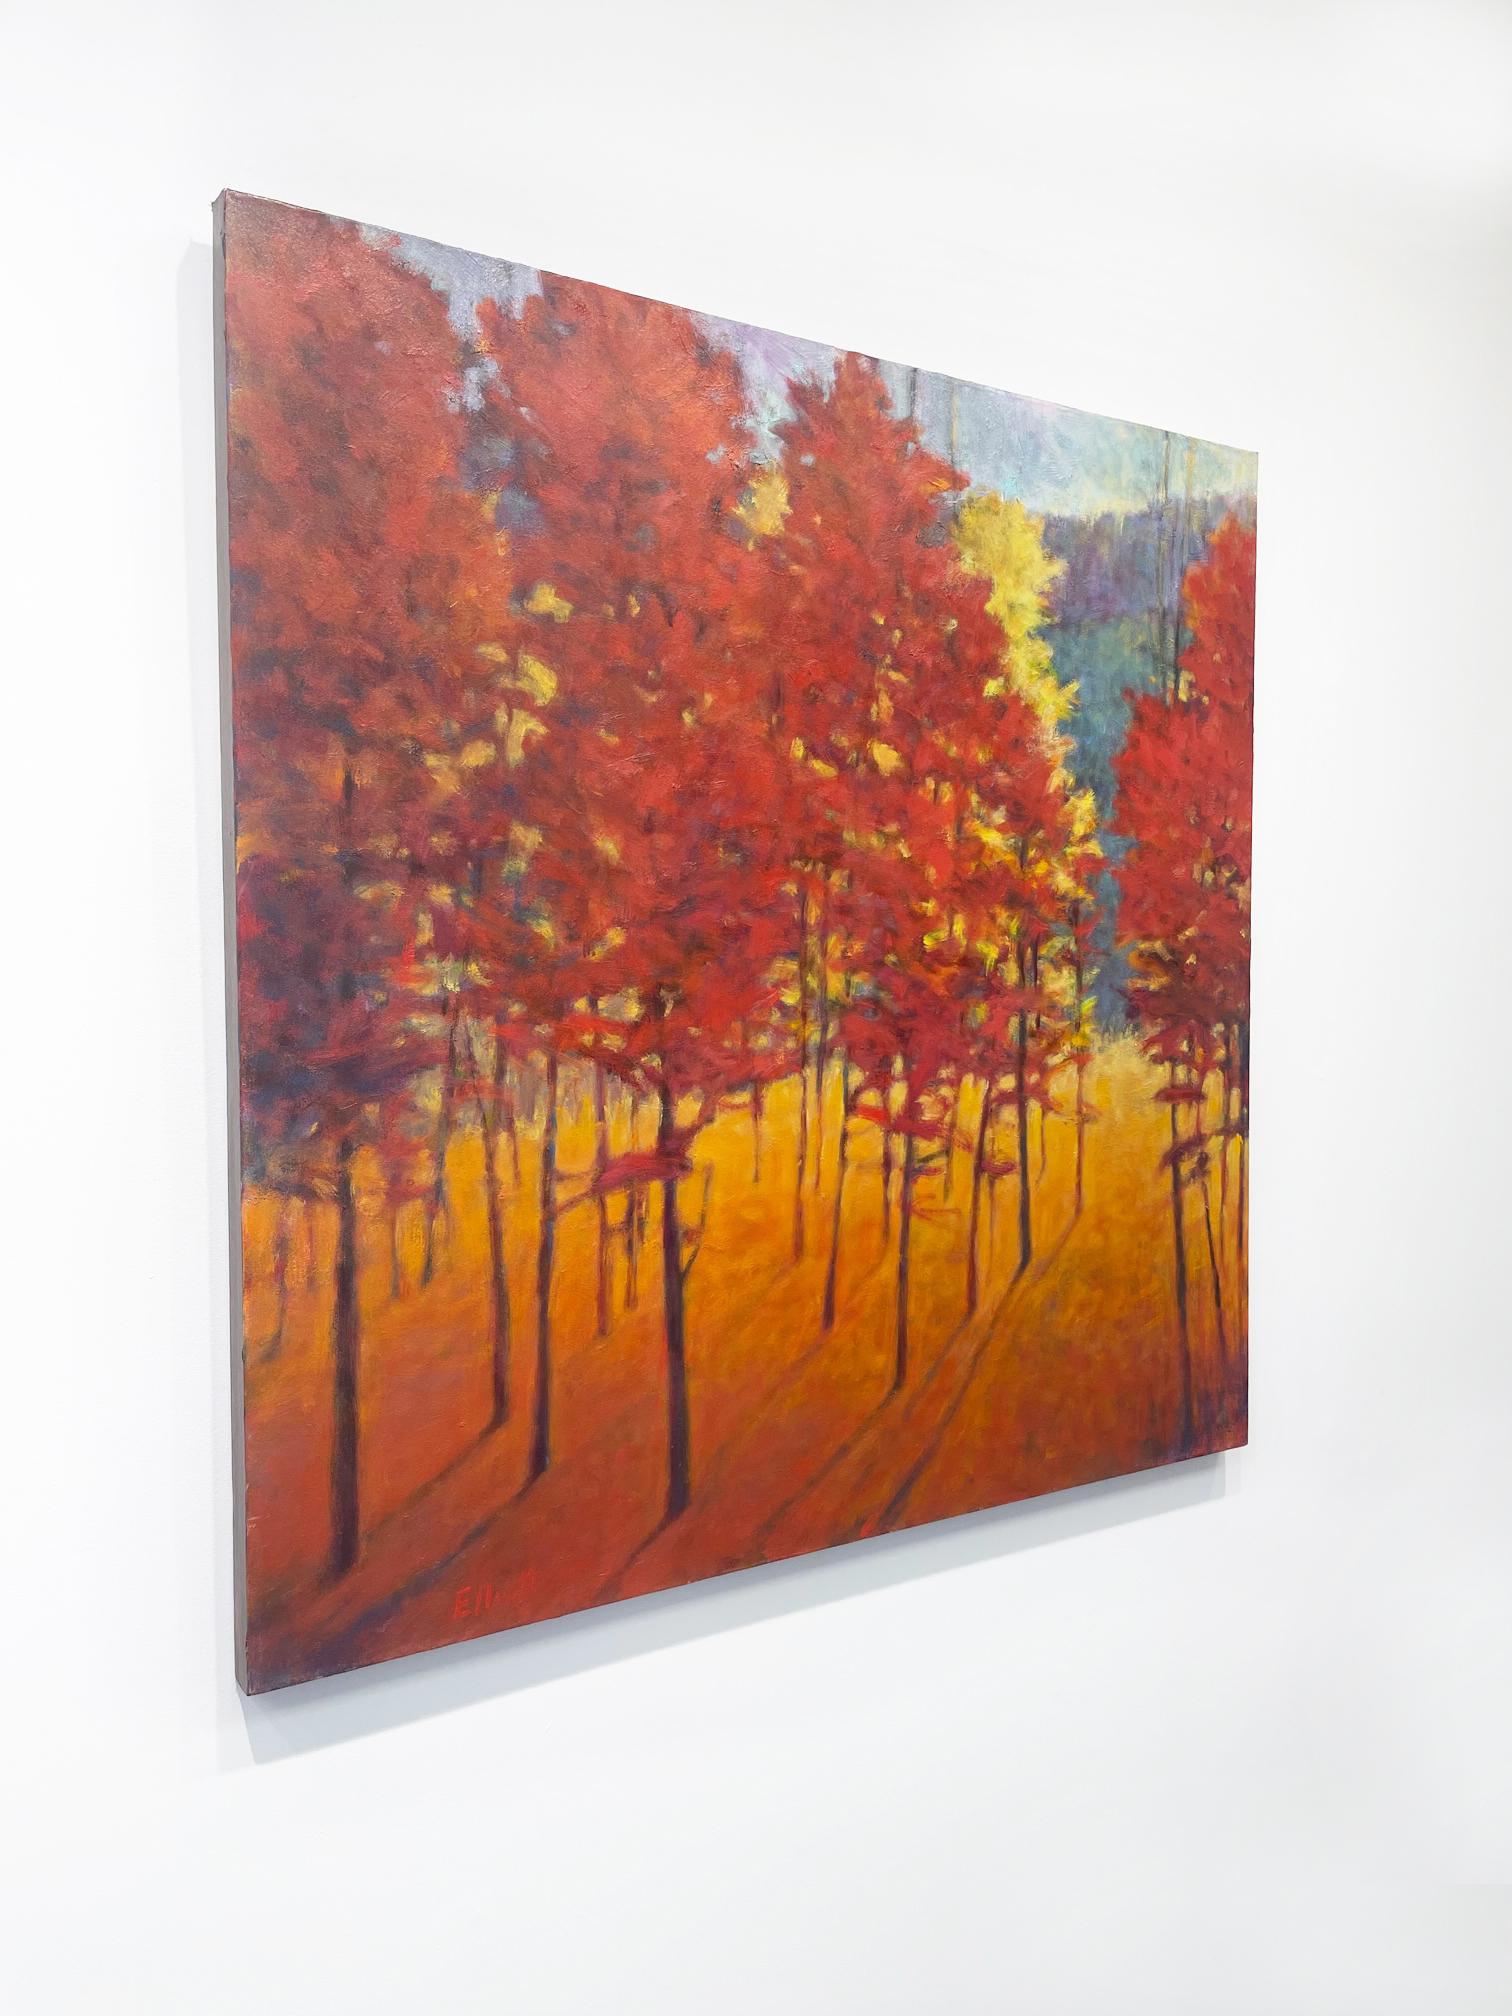 Available at Madelyn Jordon Fine Art. 'Red Stand' 2011 by American artist, Ken Elliott. Oil on canvas, 40 x 40 in. This painting of a forest incorporates a palette of rich colors in red, orange, yellow, purple, and blue. 

Colorado based artist Ken